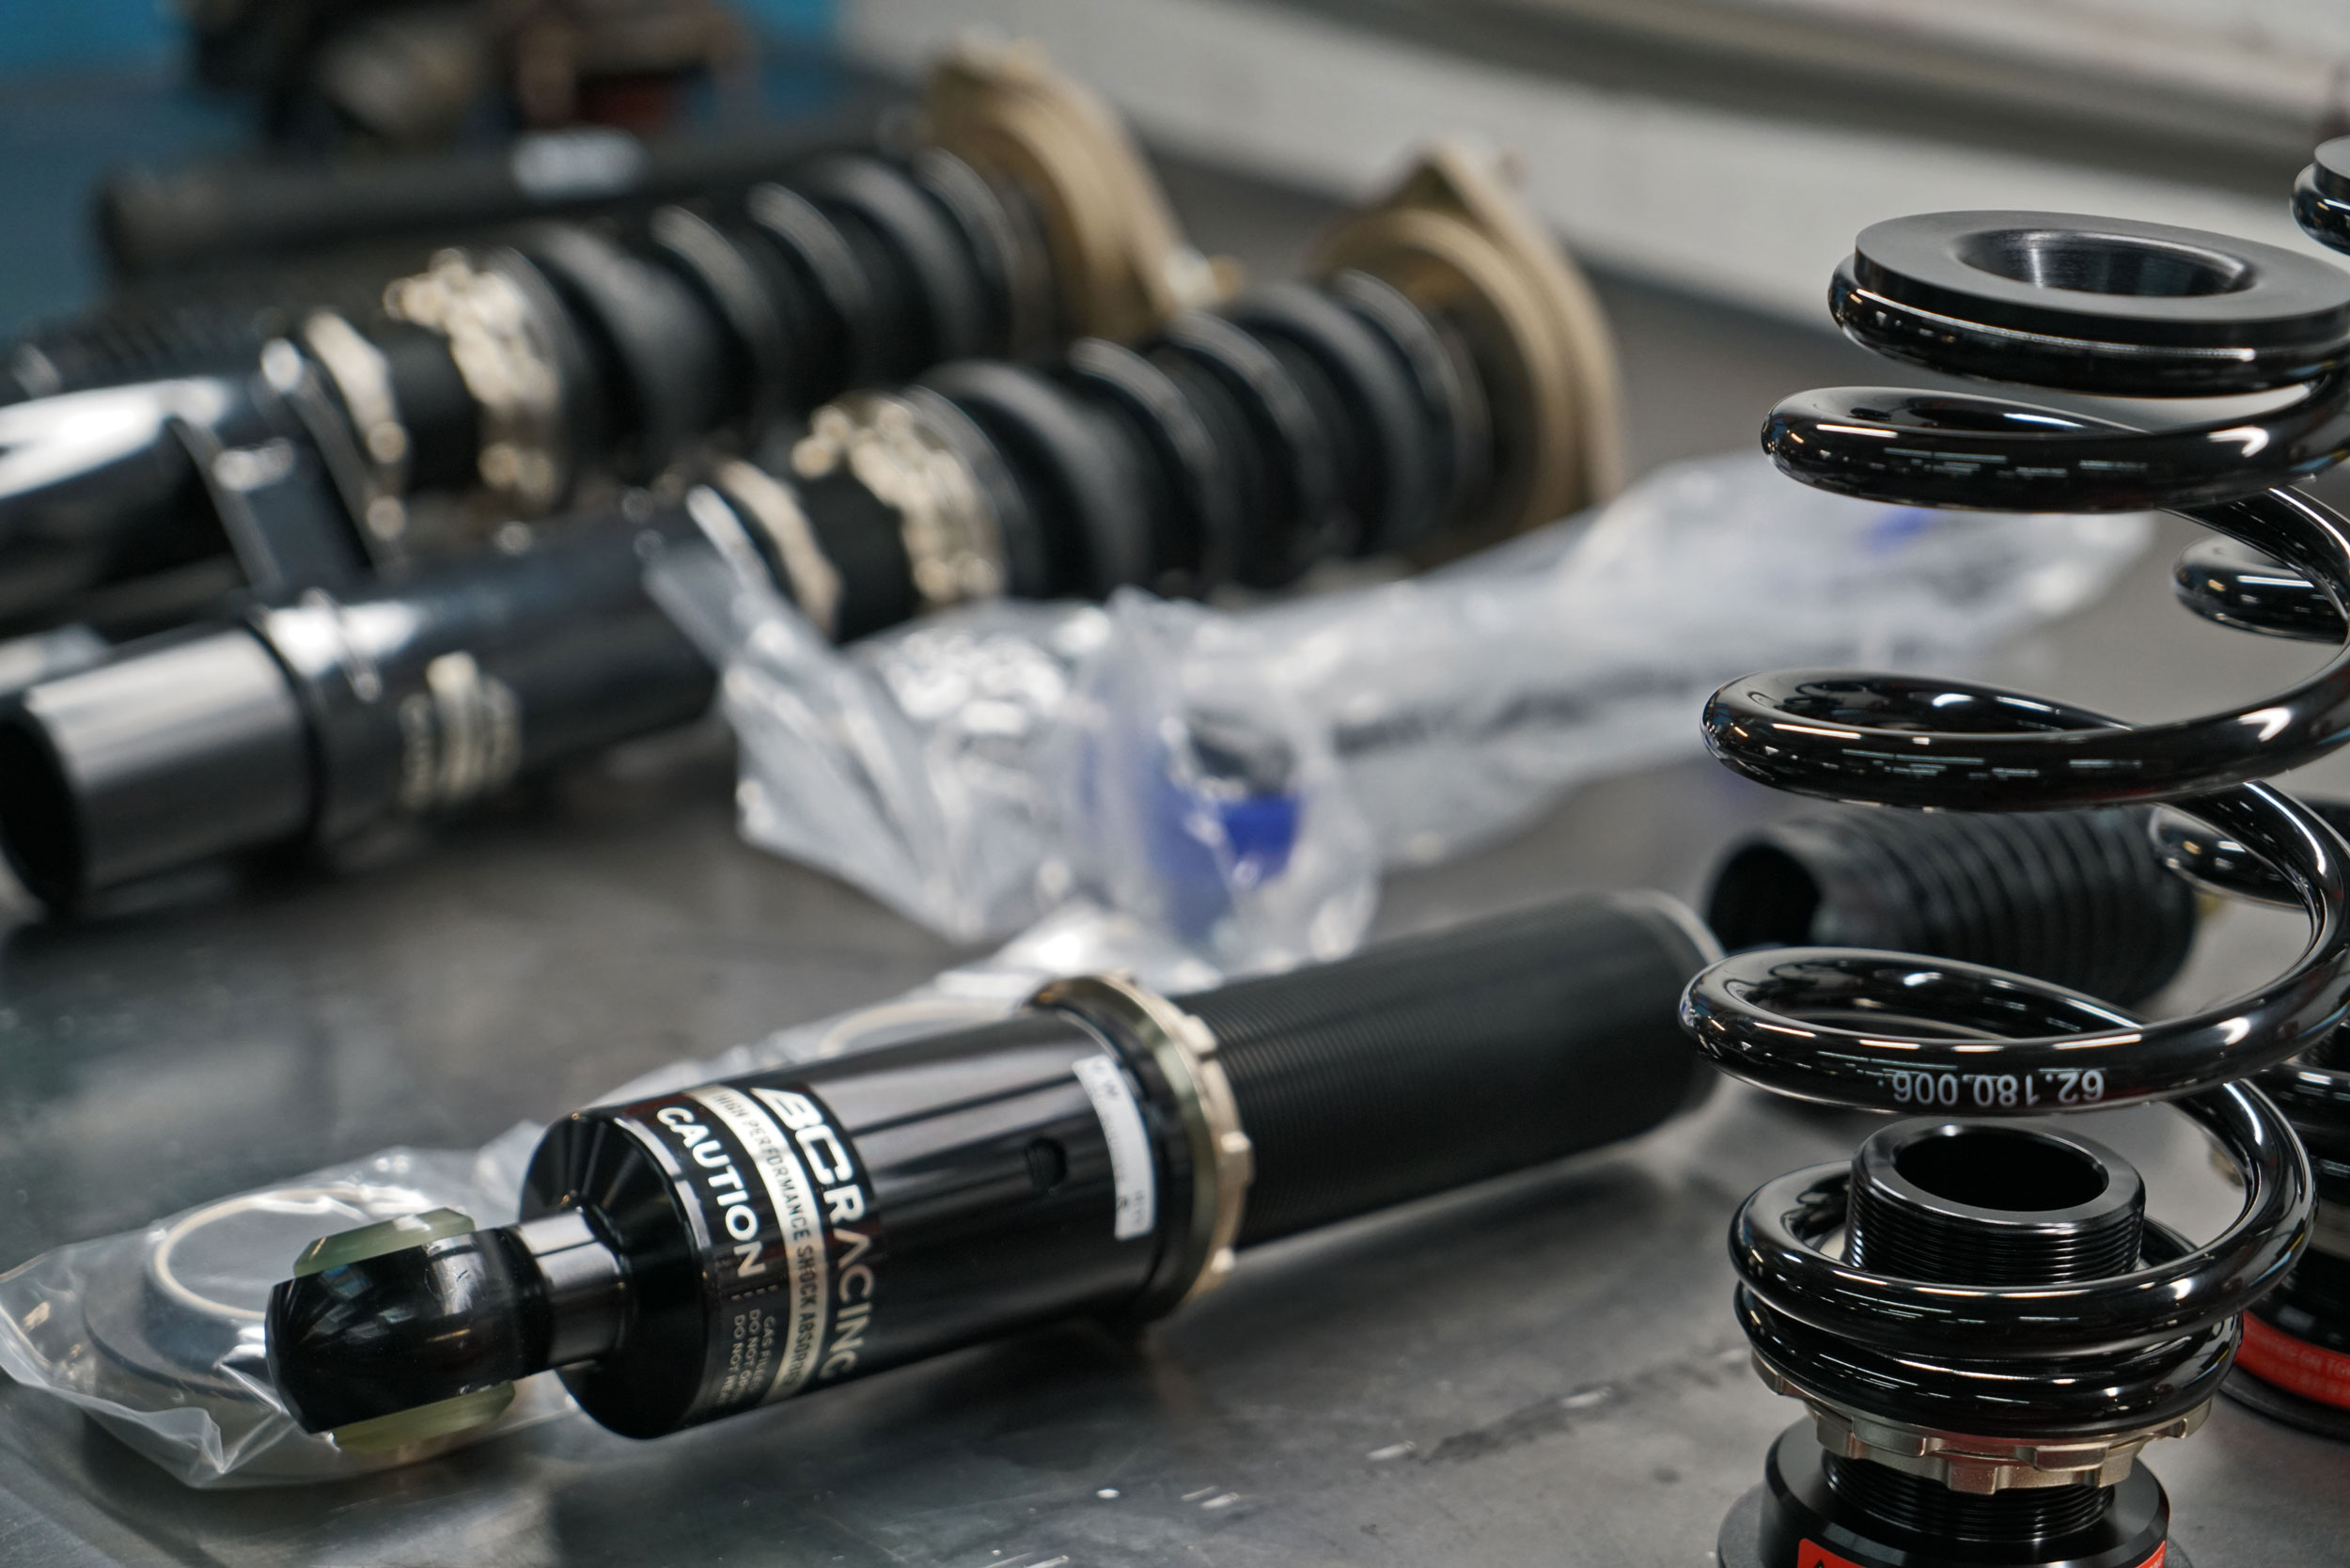 We have all necessary details to repair the Suspension System of any car in Denver, CO.